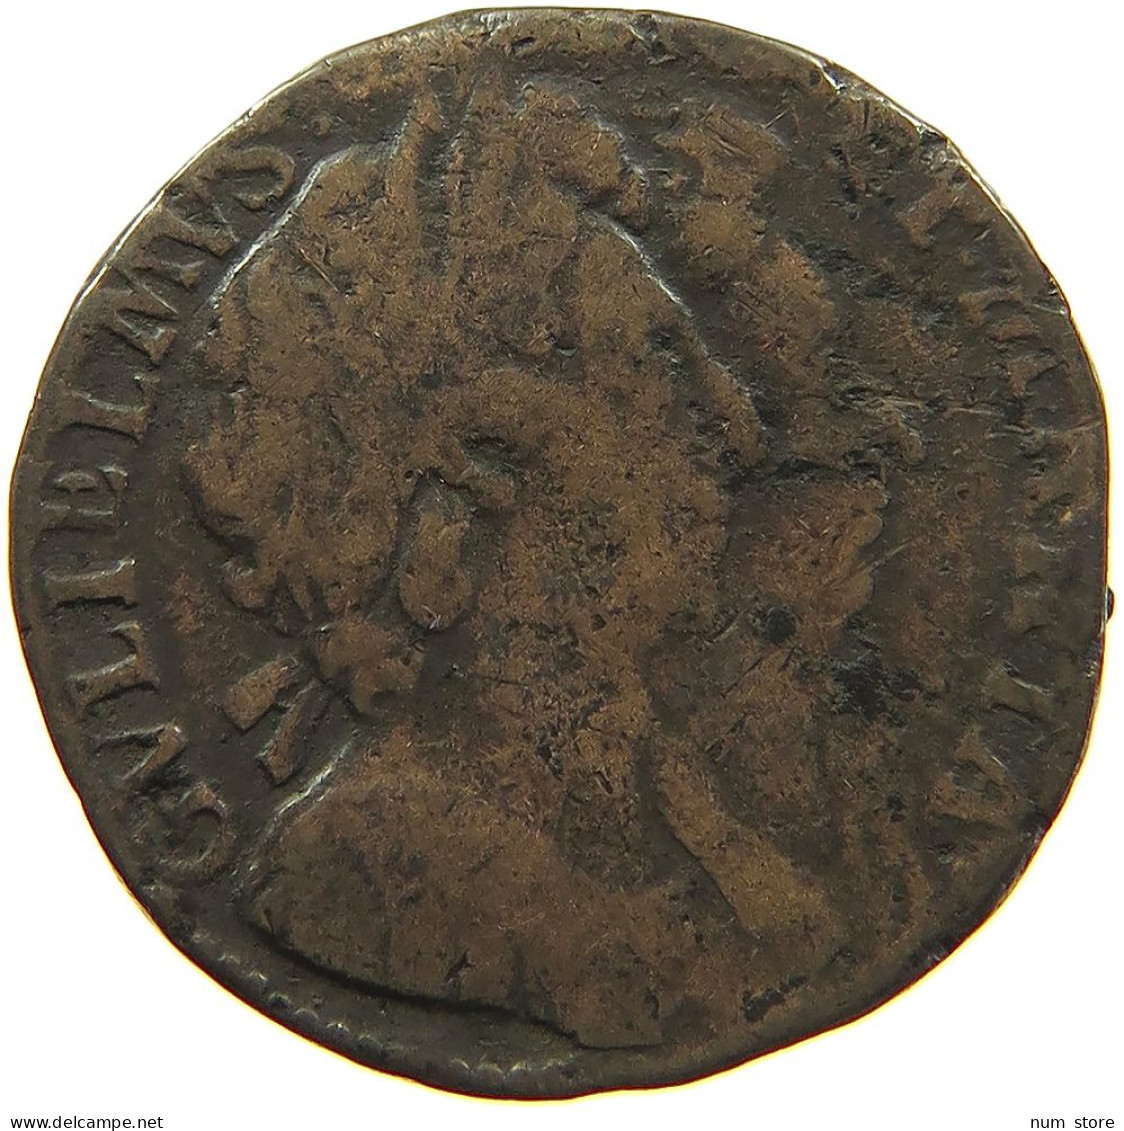 GREAT BRITAIN FARTHING 1694 William & Mary (1689-1694) #t021 0287 - A. 1 Farthing